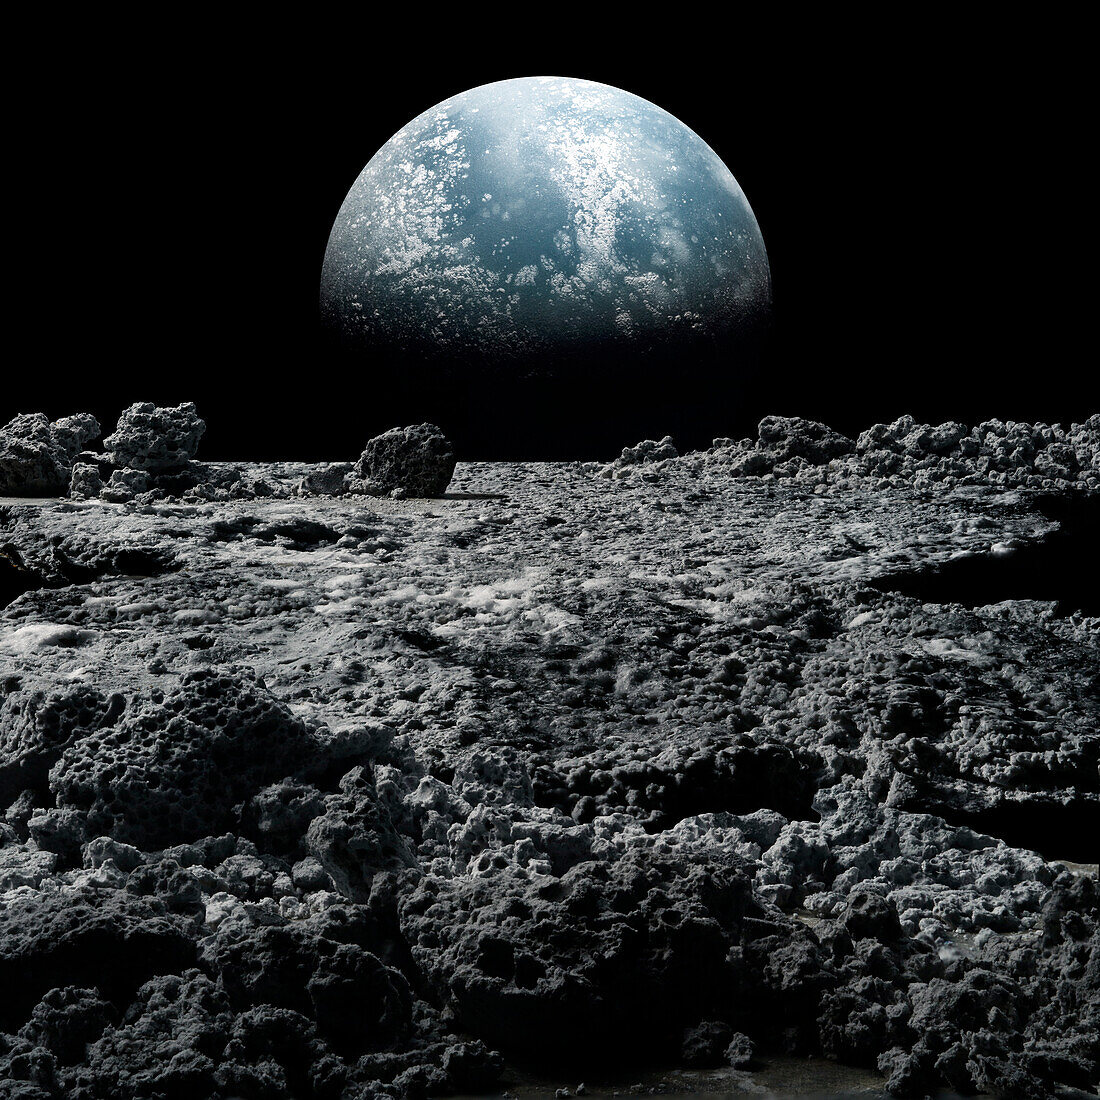 Waterworld exoplanet seen from moon, composite image